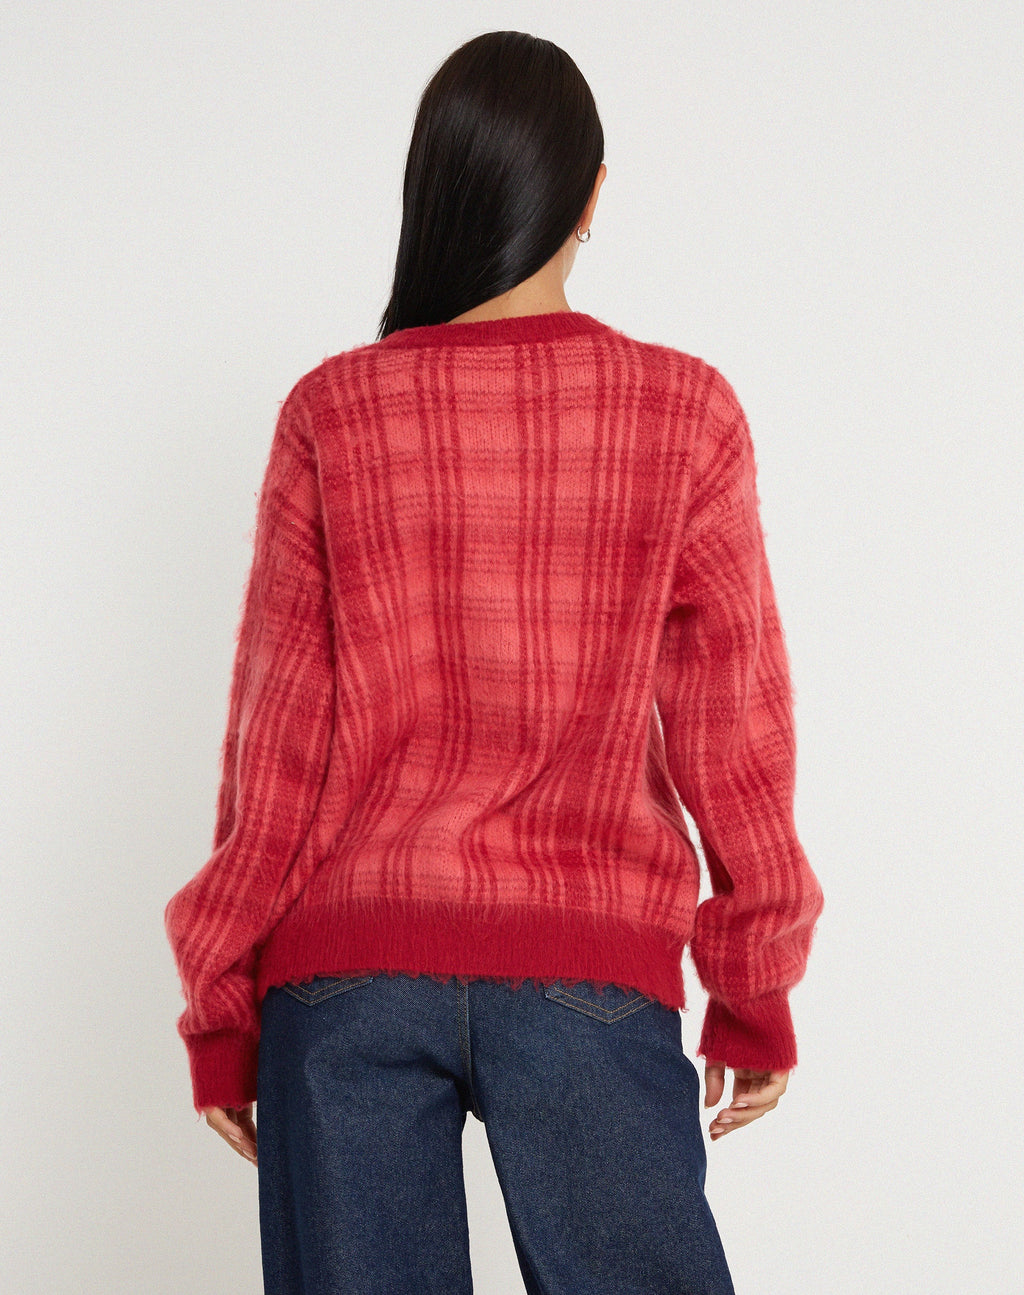 Mihail Knitted Jumper in Red and Pink